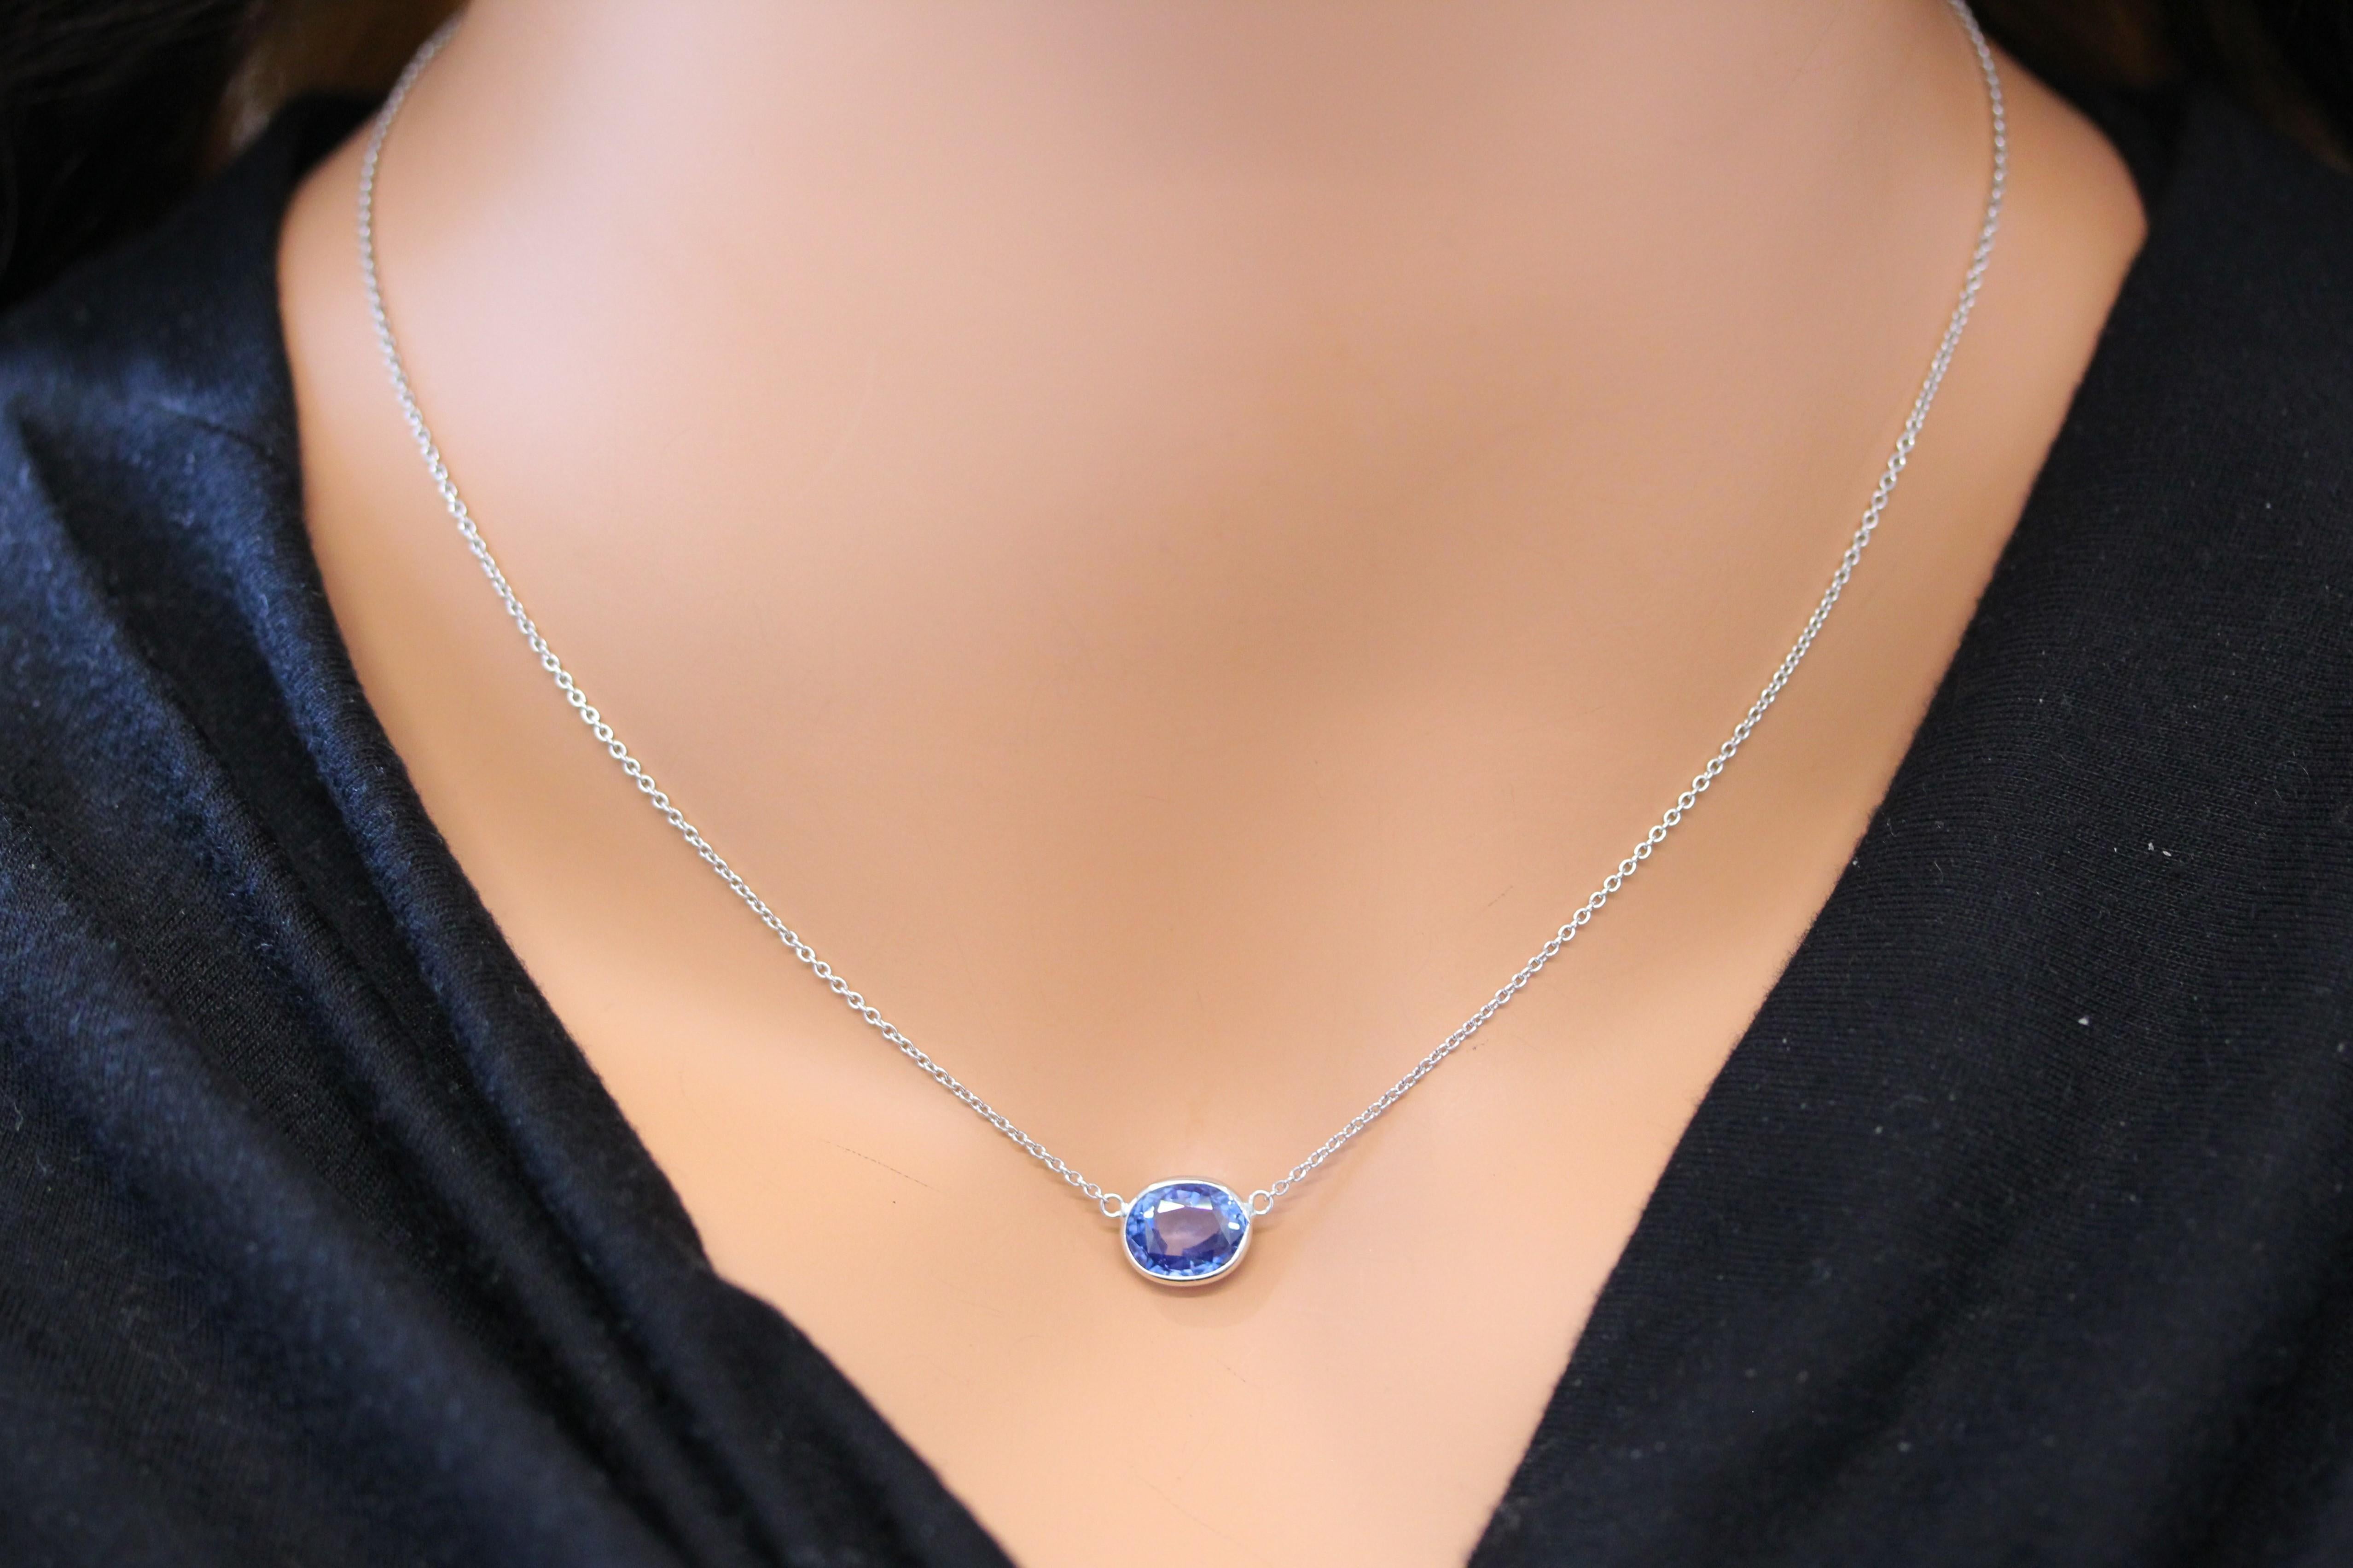 Contemporary 3.27 Carat Oval Sapphire Blue Fashion Necklaces In 14k White Gold For Sale